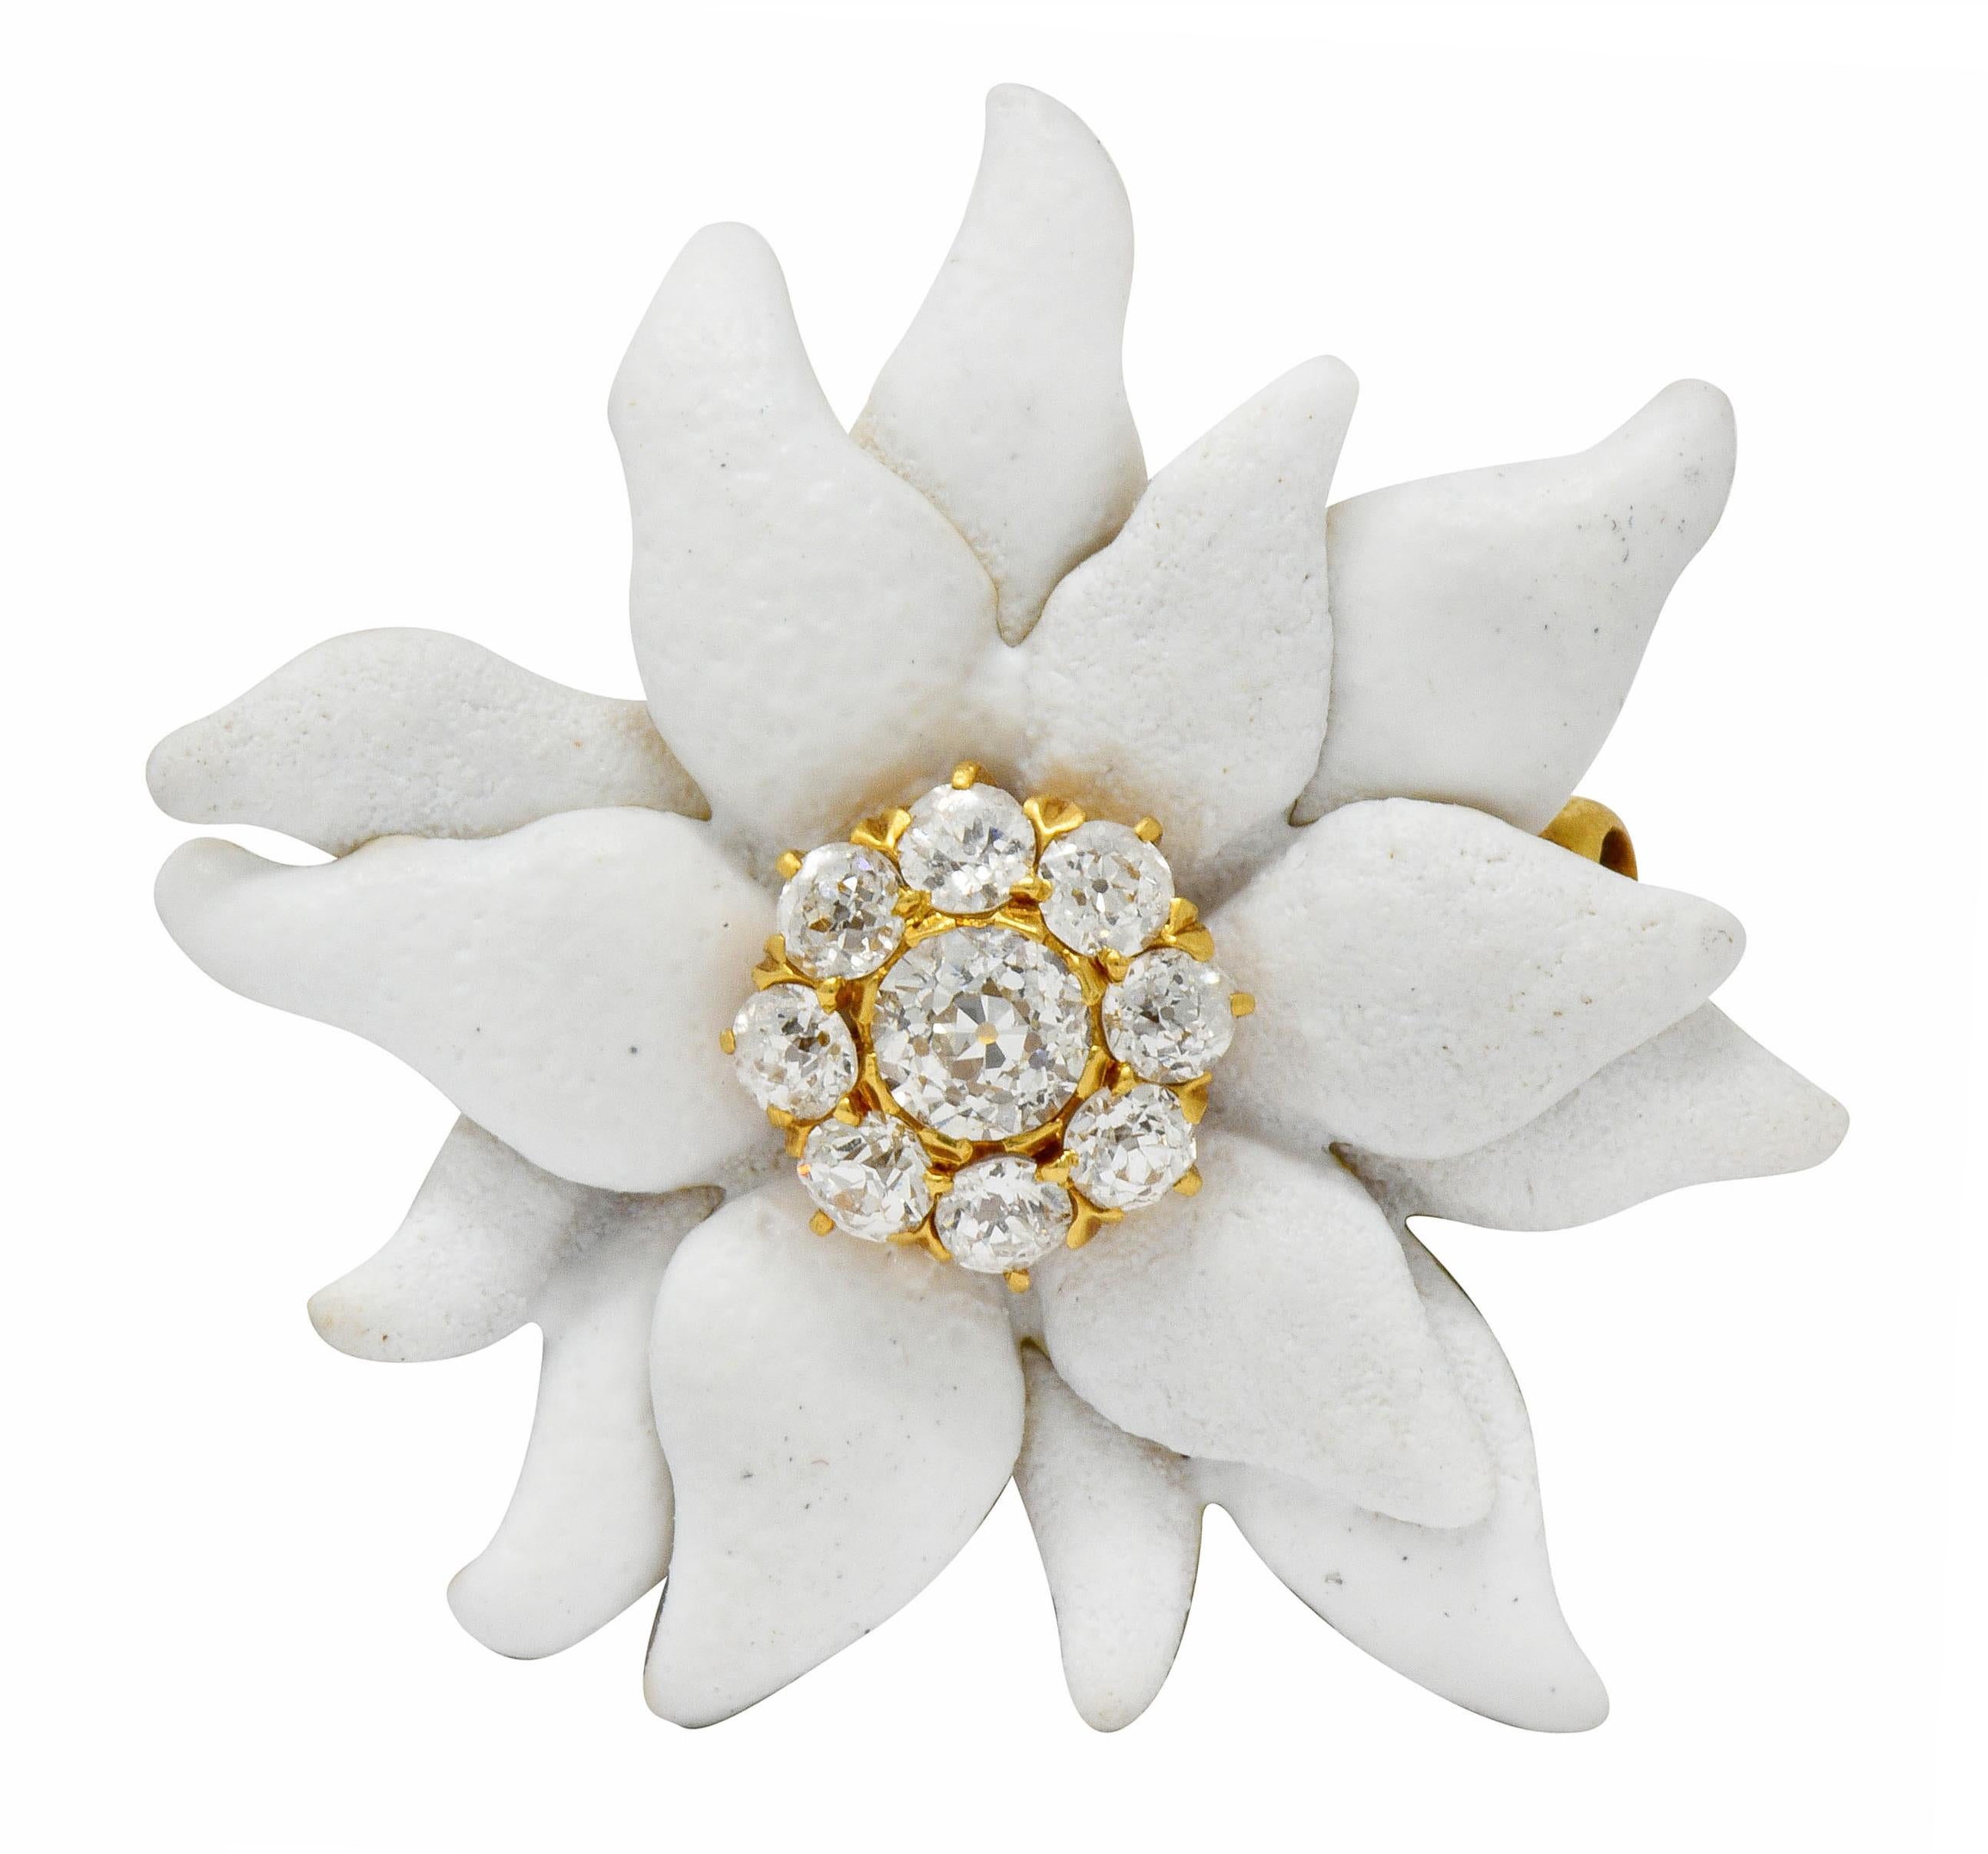 Brooch is designed as an edelweiss flower with dimensionally layered petals

Petals are coated by white enamel, matte, and exhibit no loss

Centering an old European cut diamond cluster, weighing approximately 1.30 carats; G to J color with VS